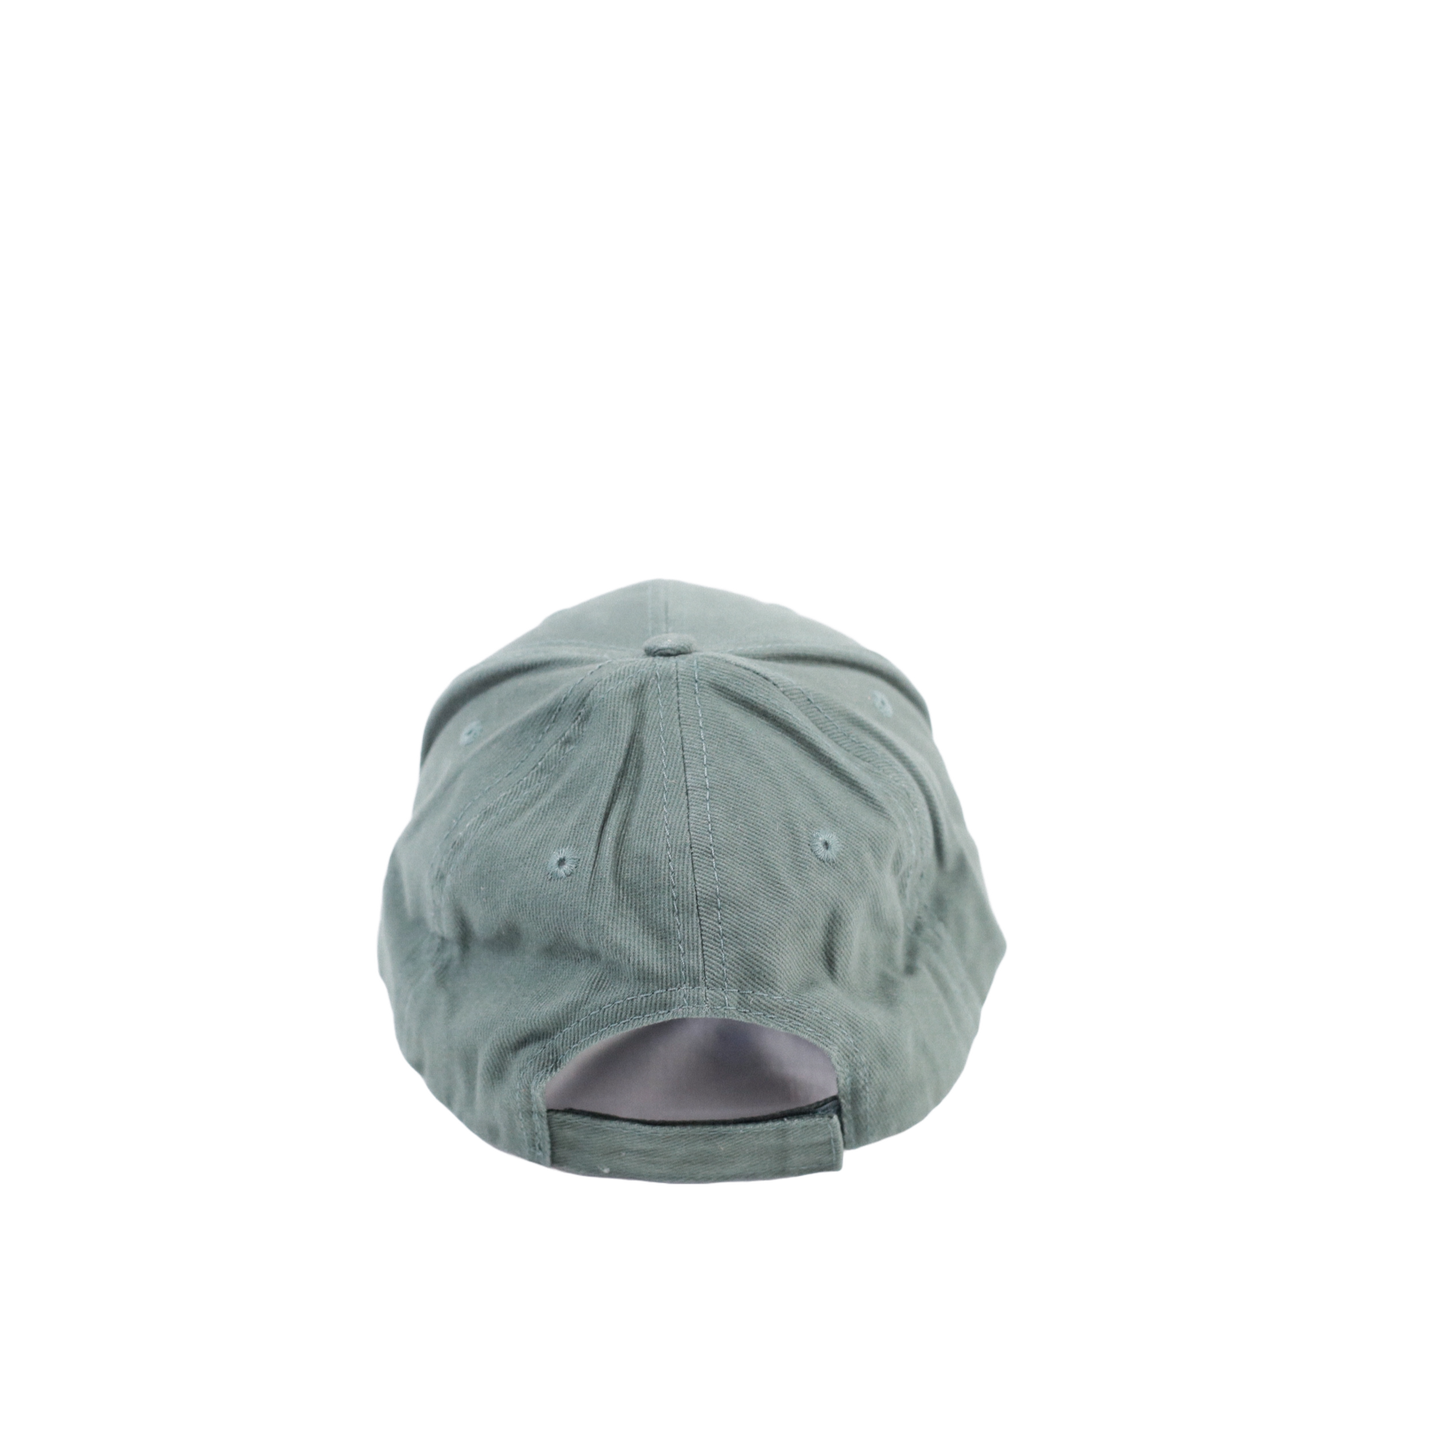 Cap | Triage Manager | Green